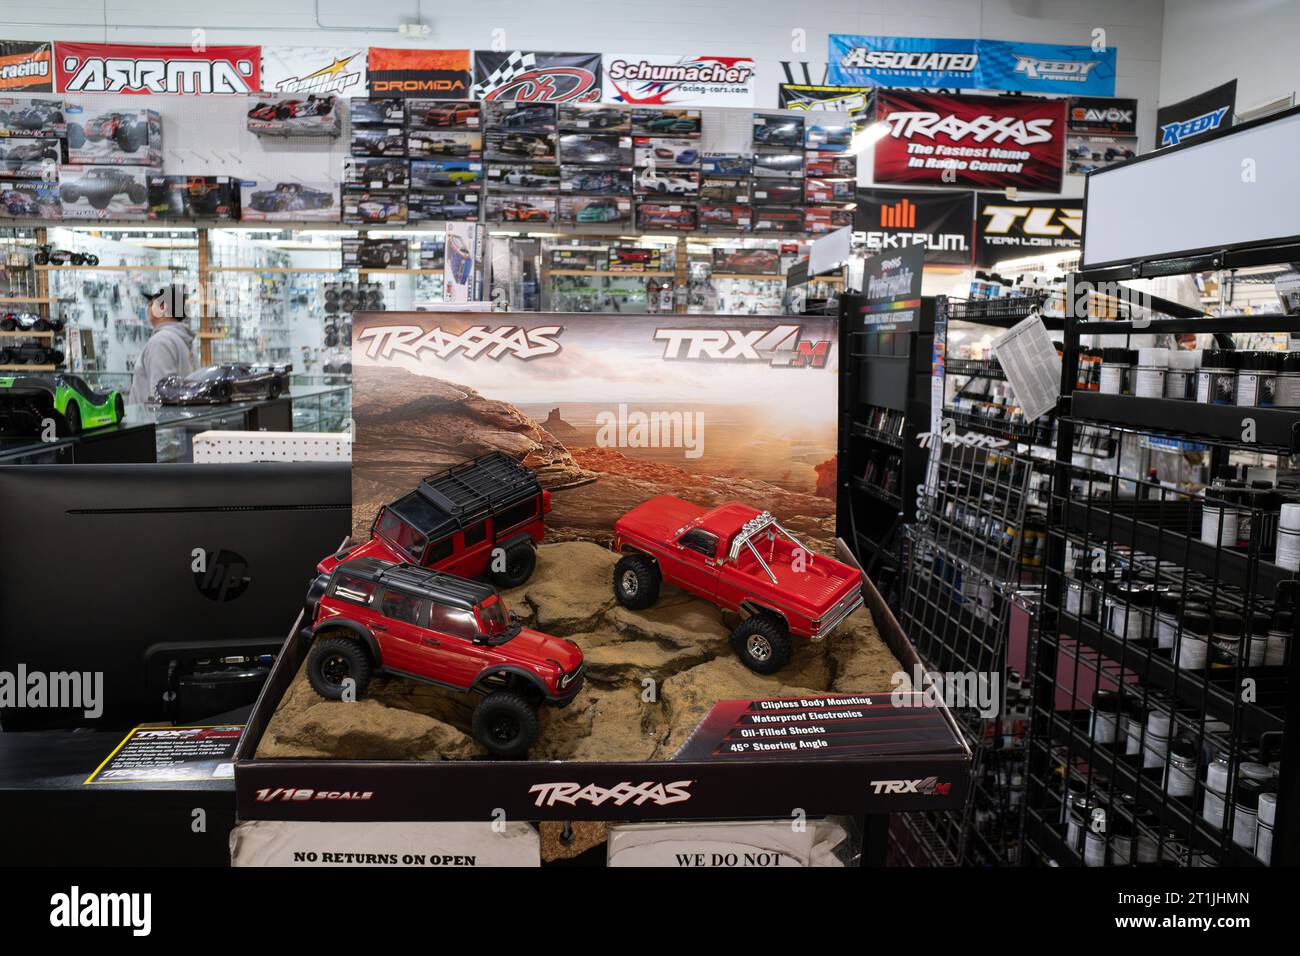 Traxxas TRX4M radio controlled crawler truck display at an RC hobby shop Stock Photo